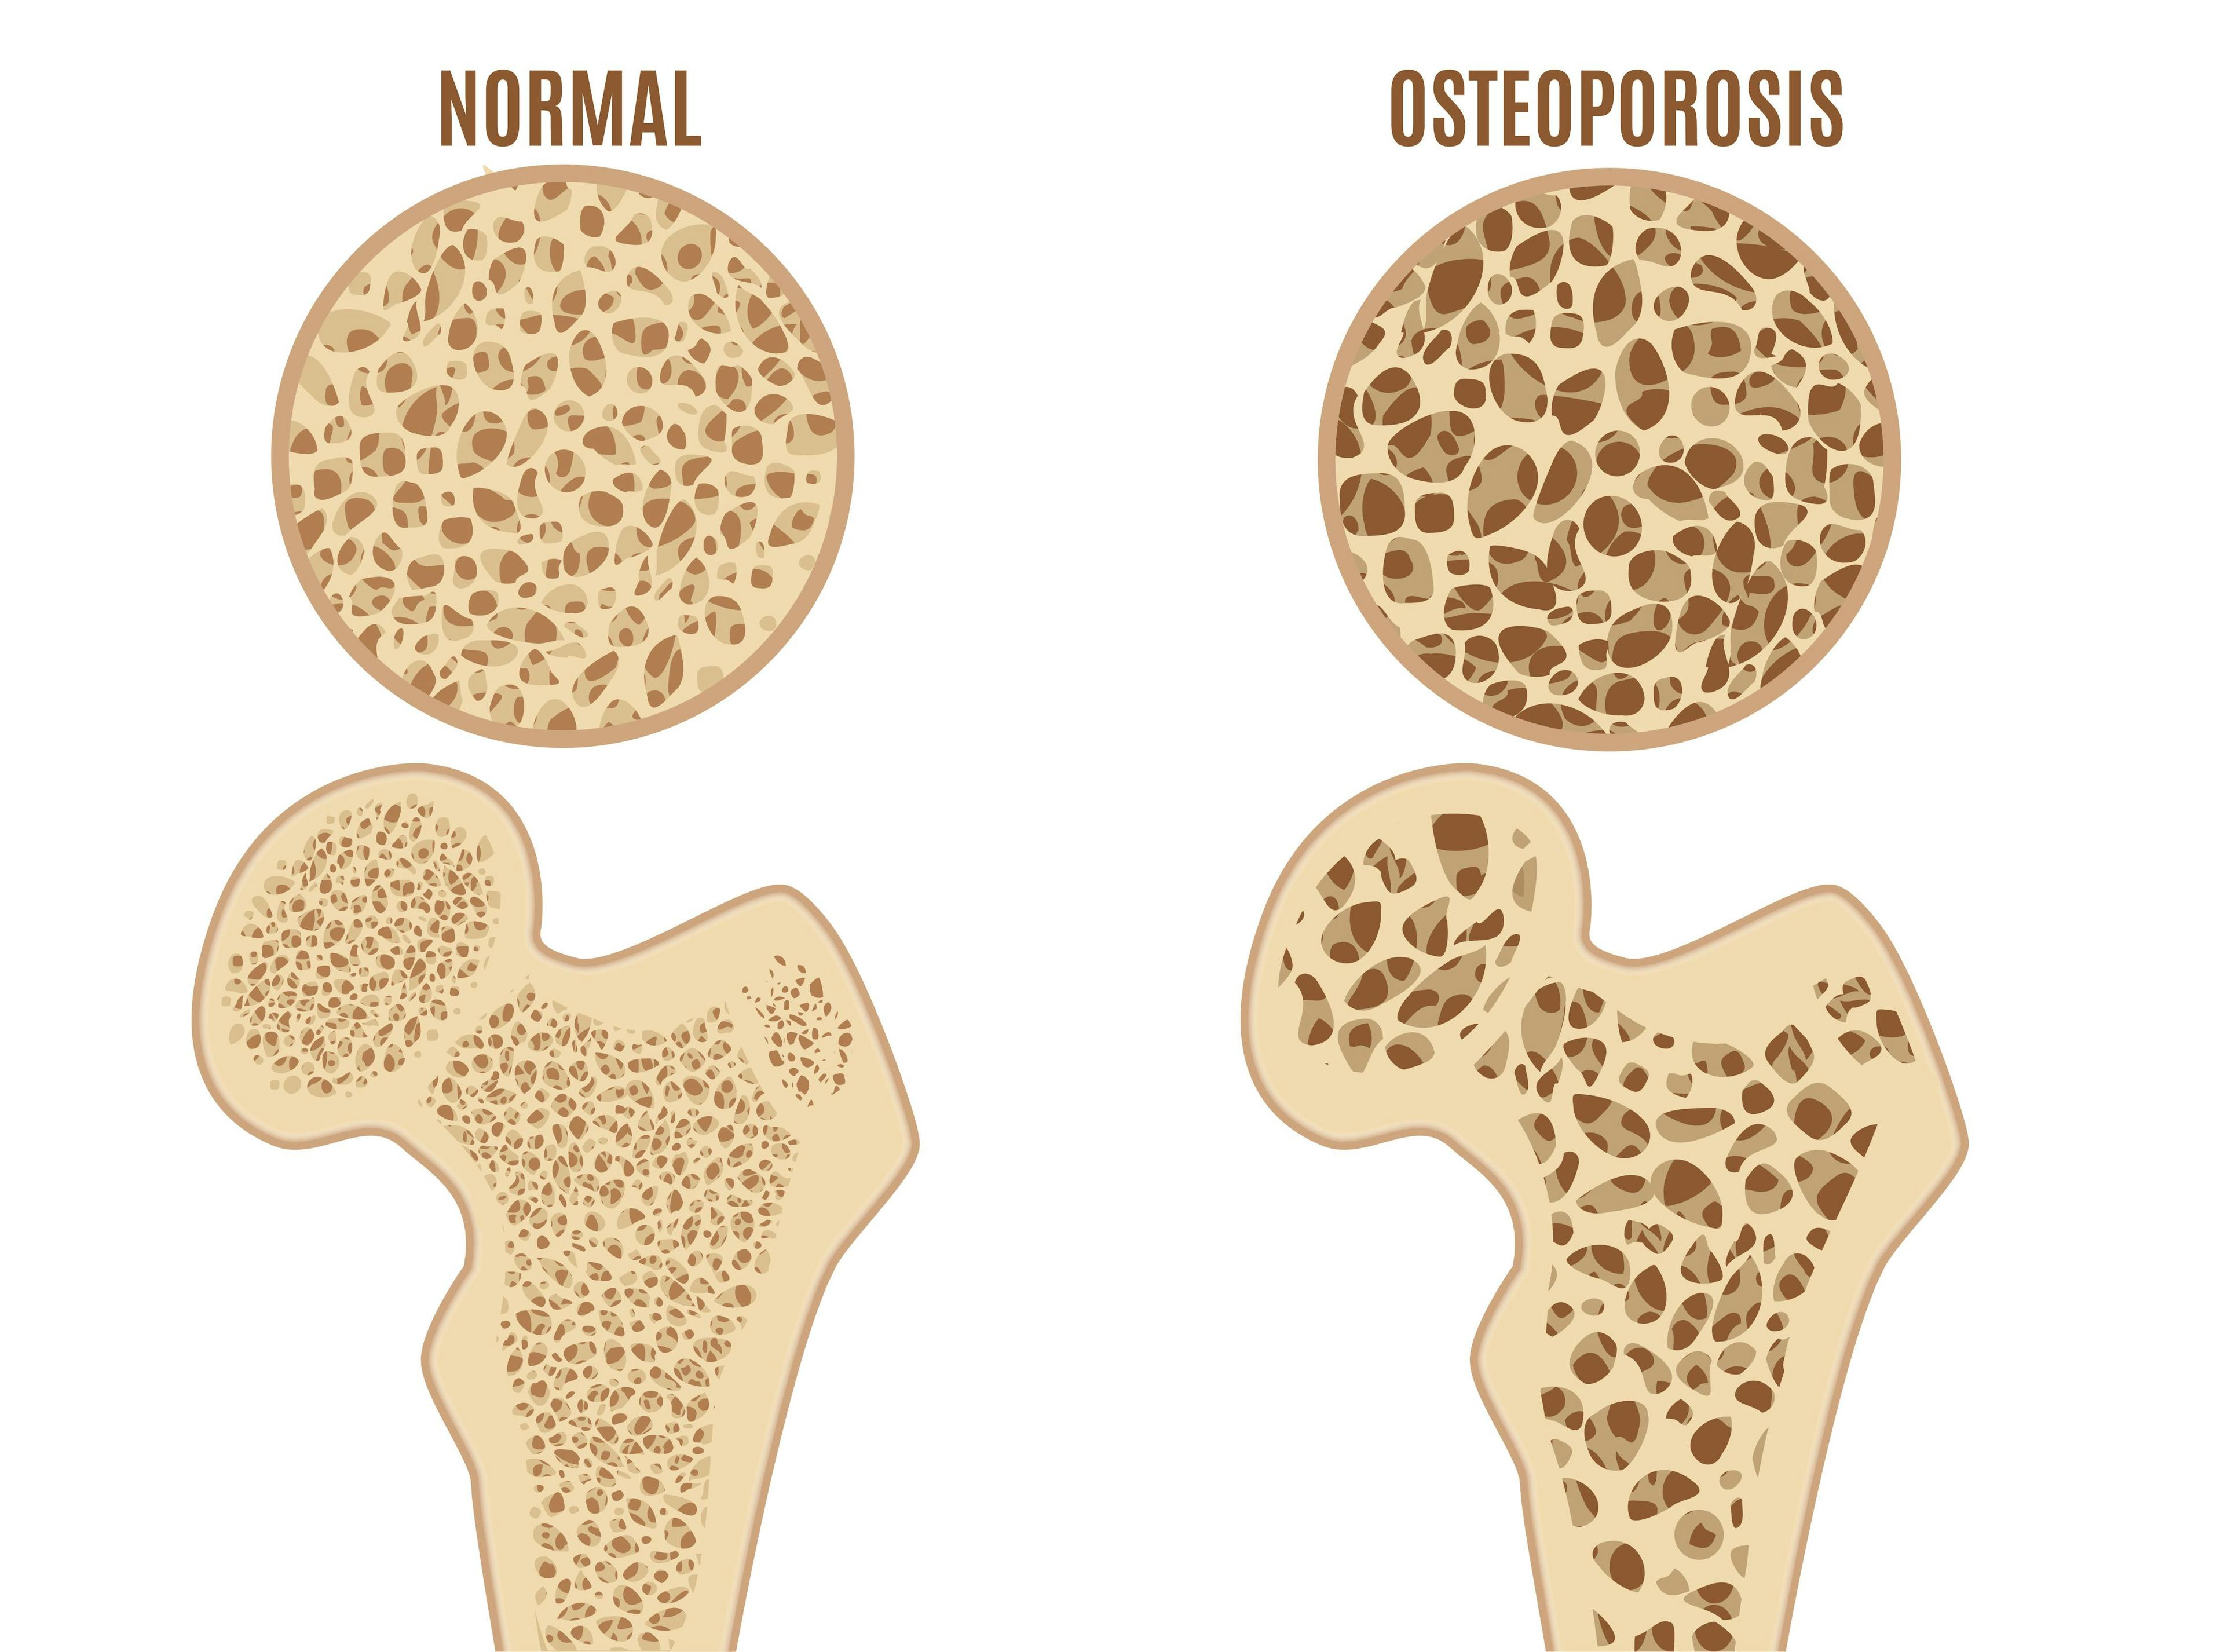 Graphic of normal bone and bone with osteoporosis | Image credit: bigmouse108 - stock.adobe.com